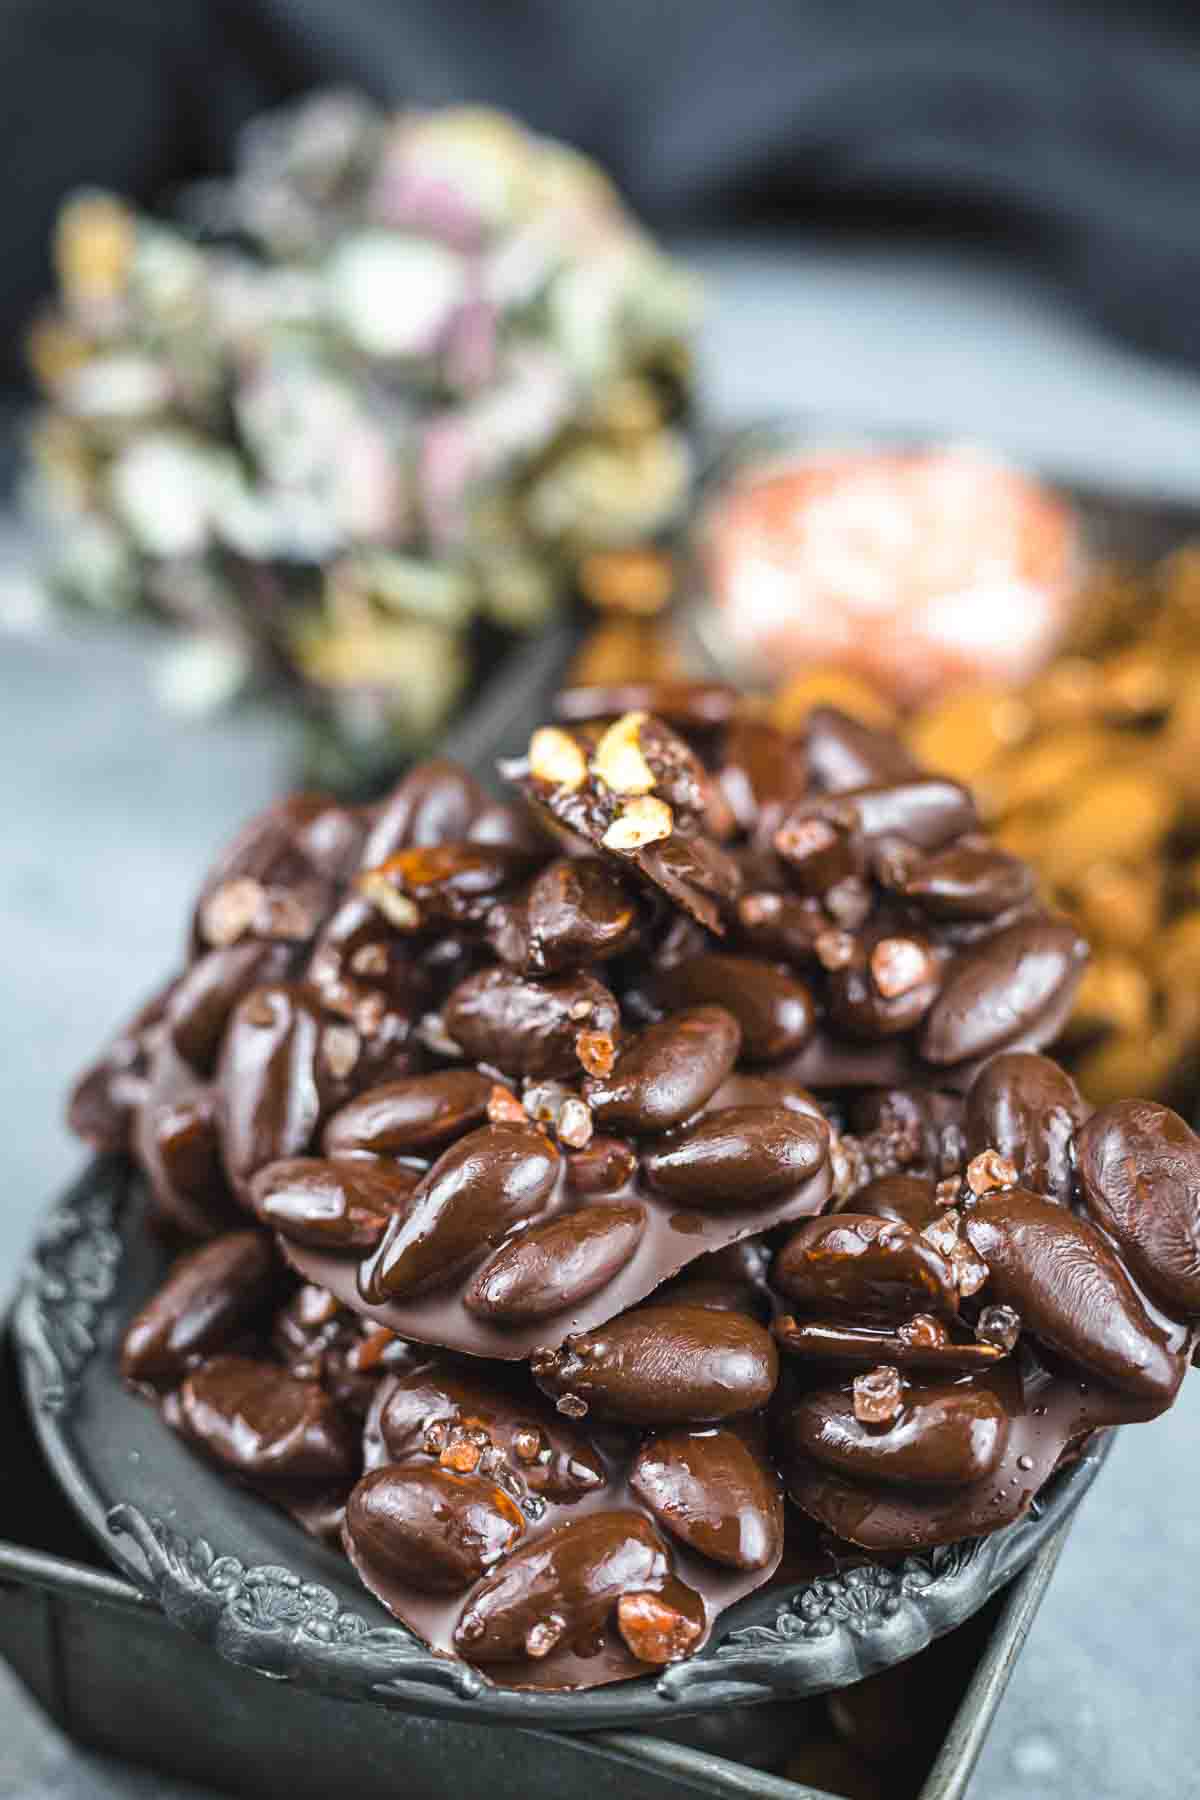 Chocolate covered almonds on a plate.